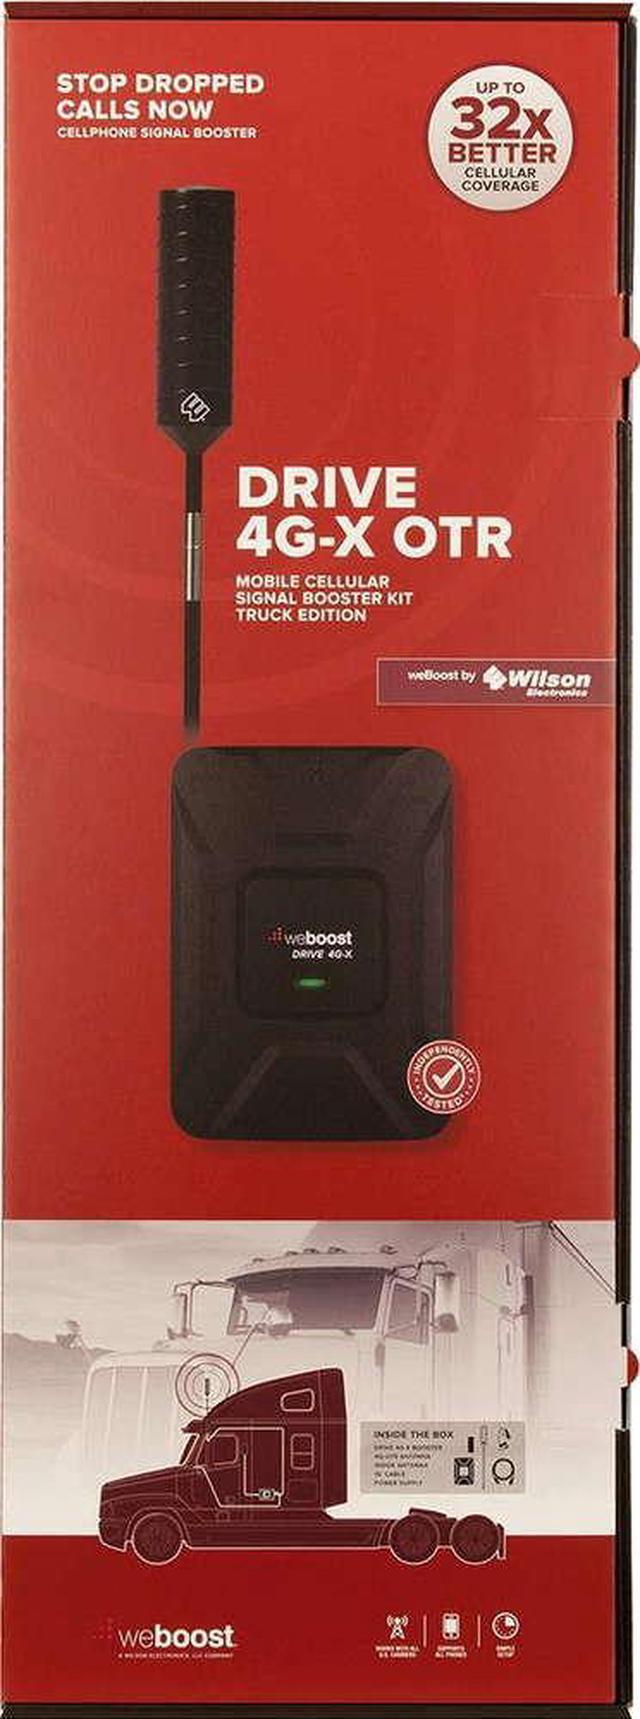 weBoost Drive 4G-X OTR - Remote Vehicle Cell Phone Signal Booster Kit 